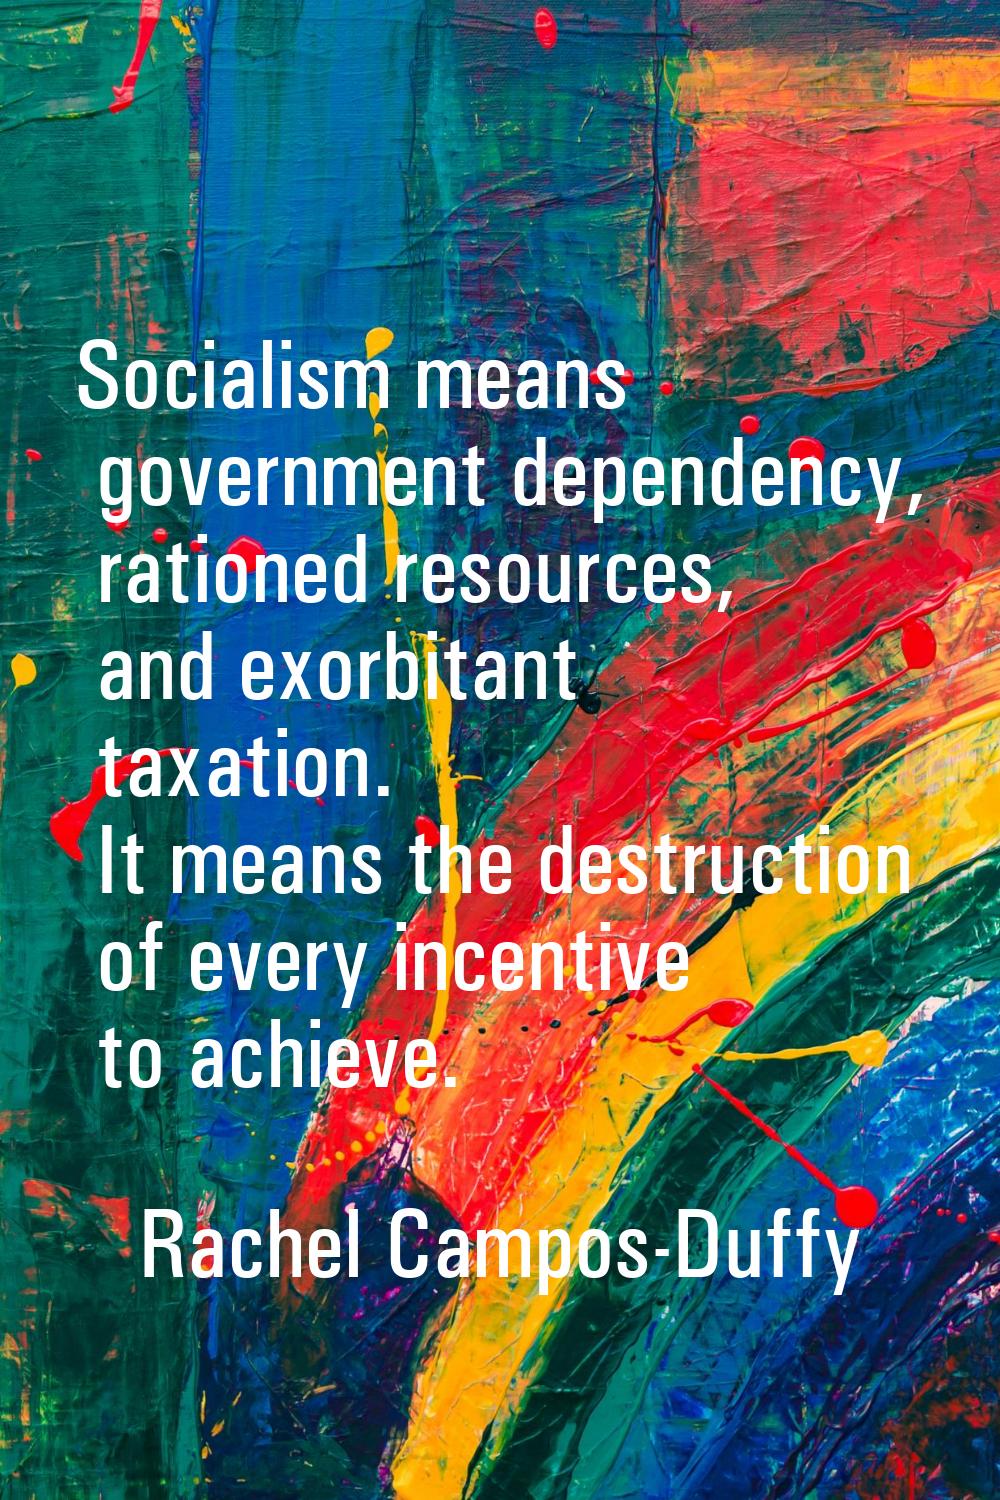 Socialism means government dependency, rationed resources, and exorbitant taxation. It means the de